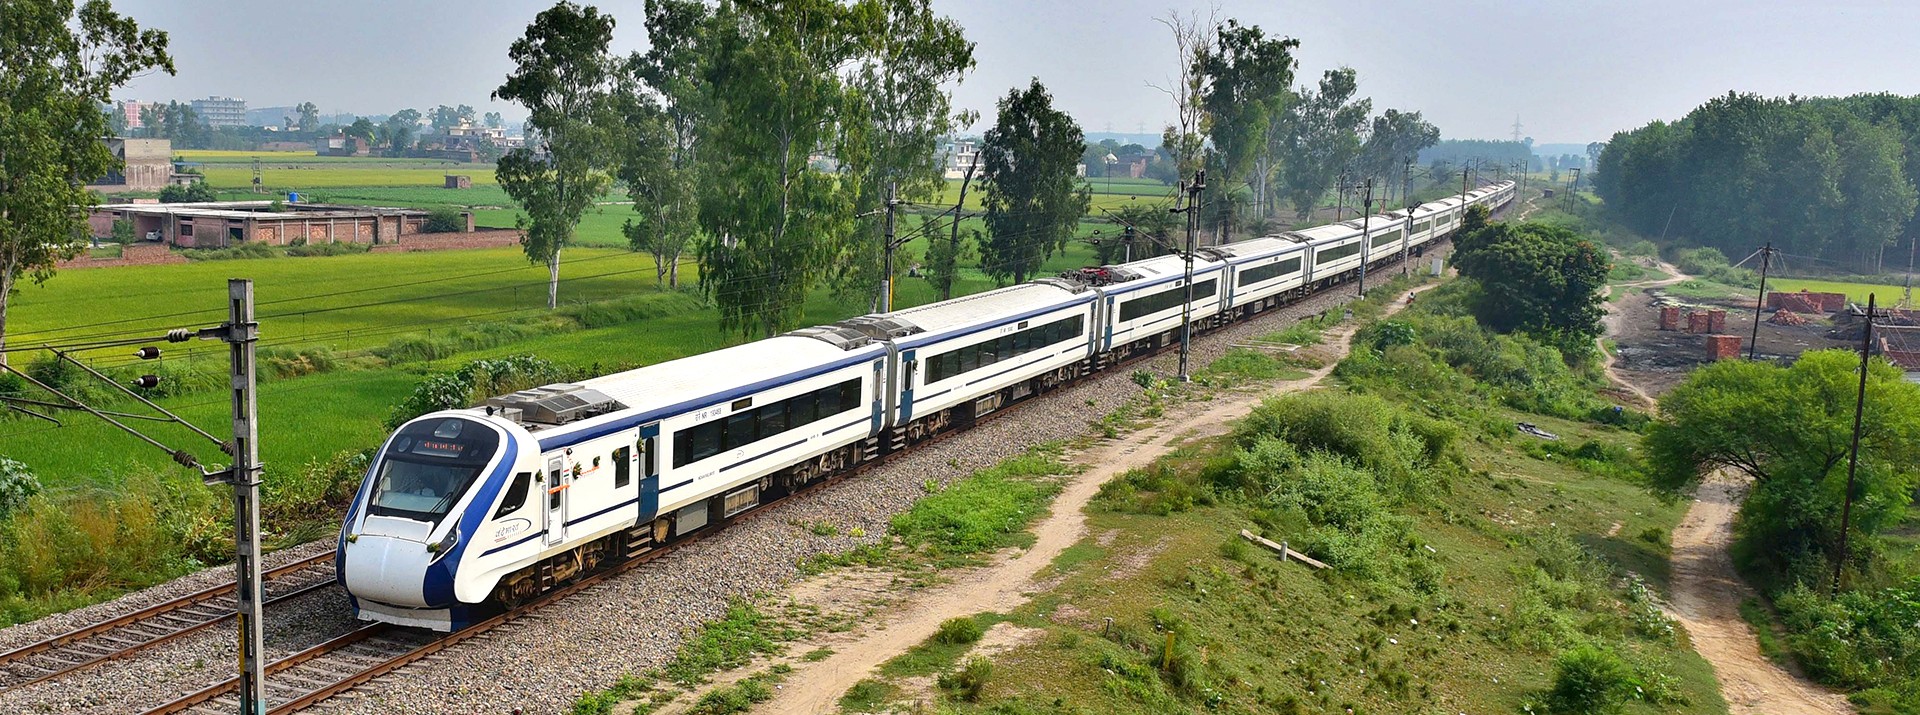 The new Indian intercity train Vande Bharat Express passes through Indian countryside outside a city.